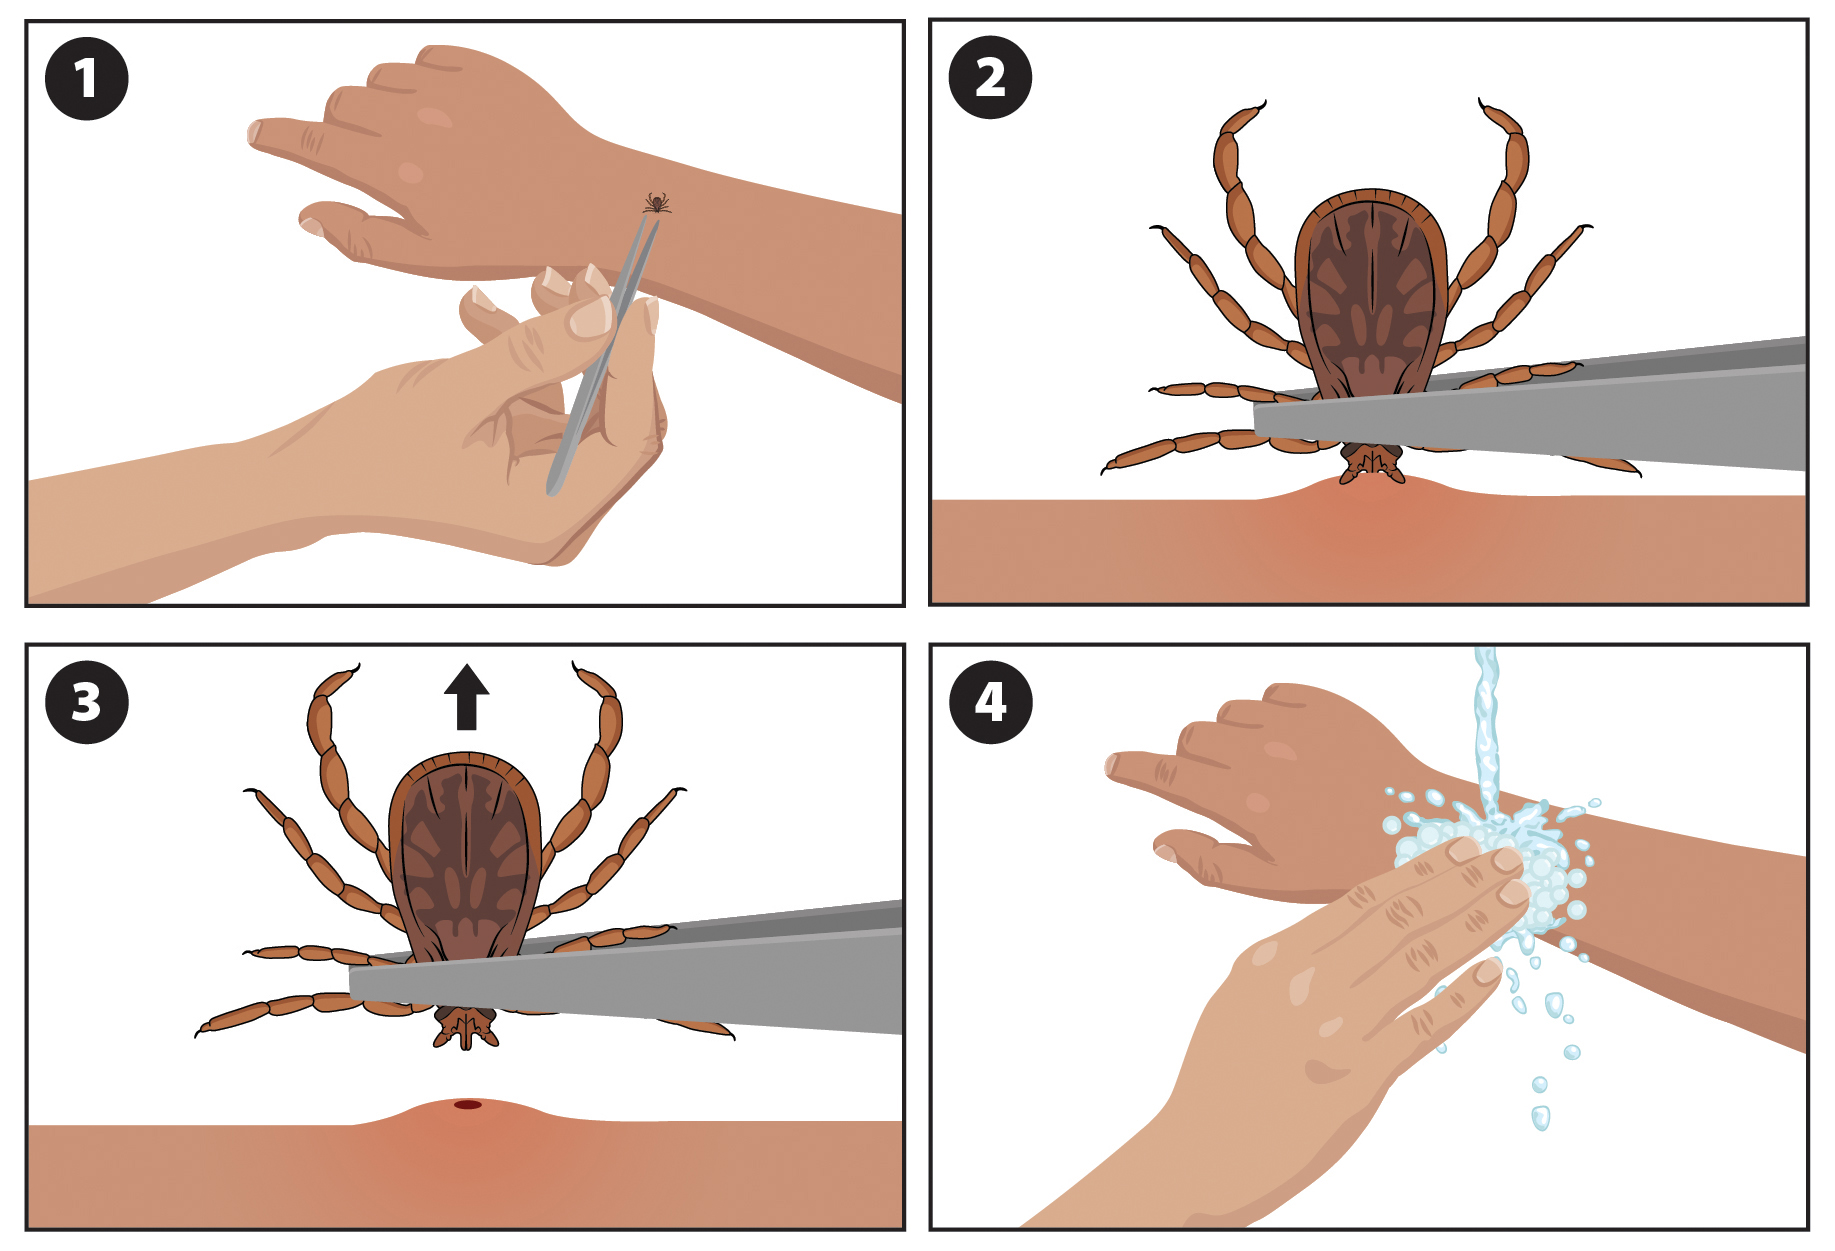 A four step diagram shows how to safely remove a tick with tweezers